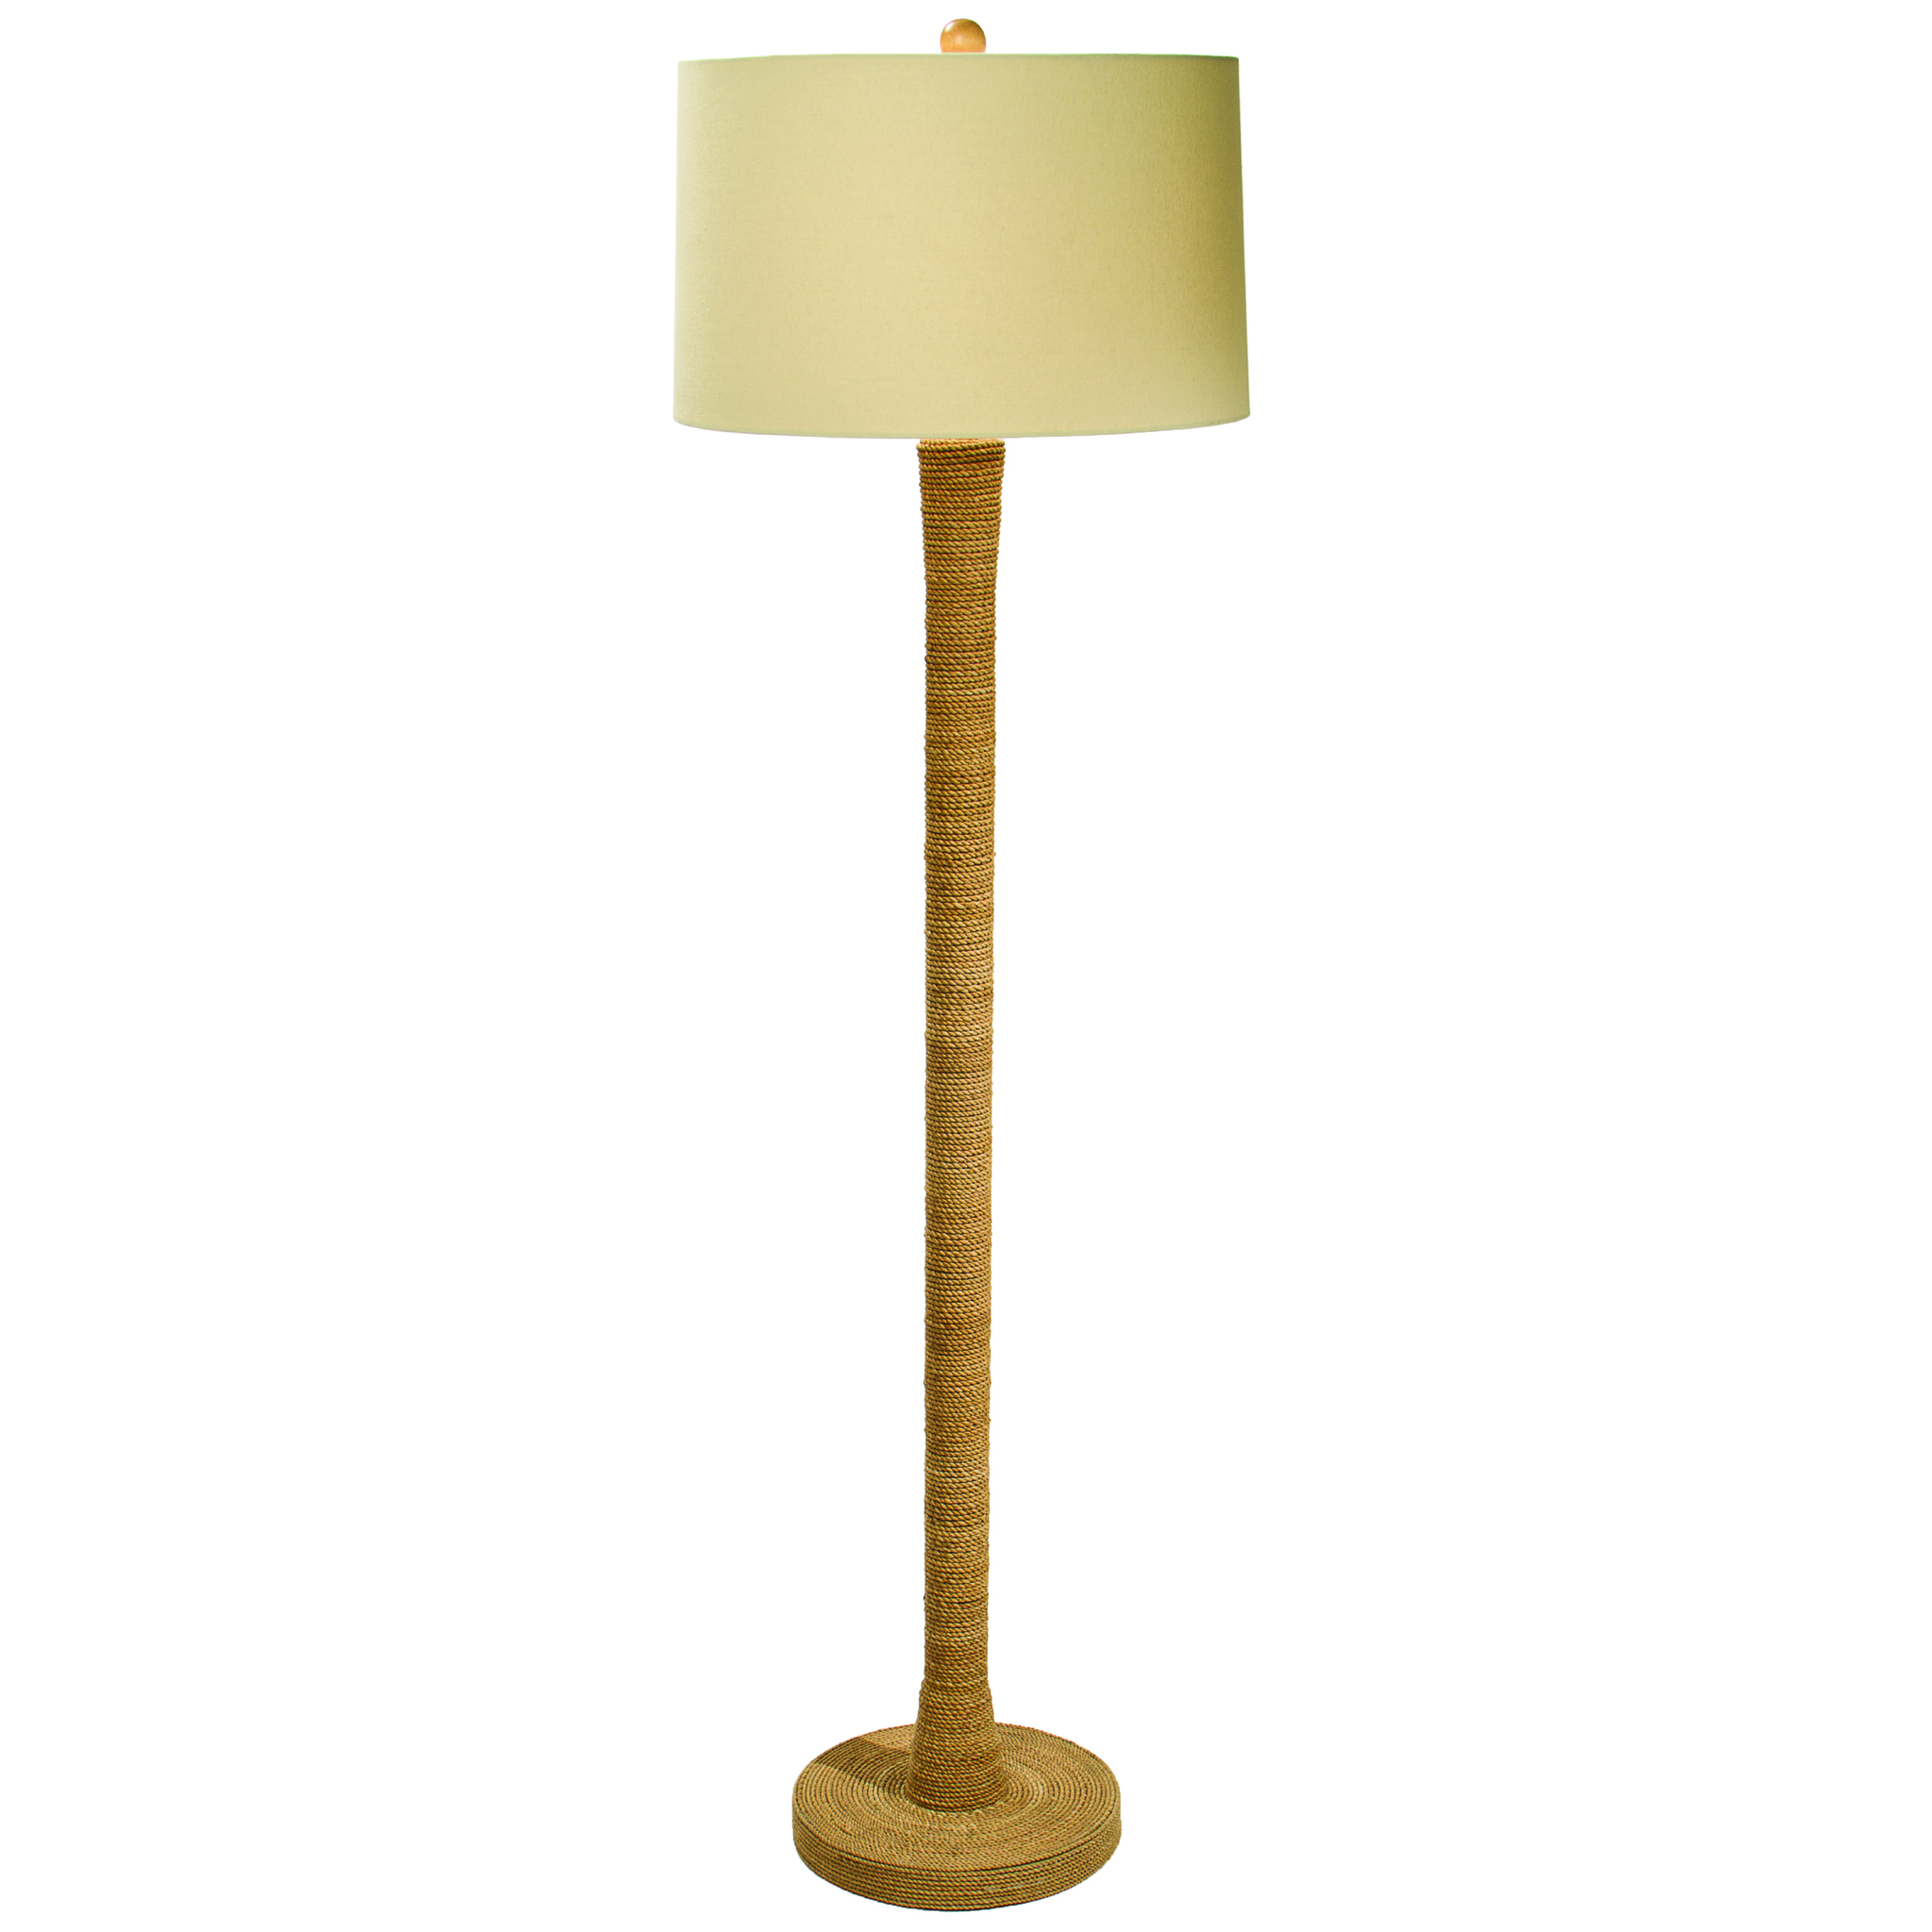 Wrapped Up Floor Lamp-$975.00